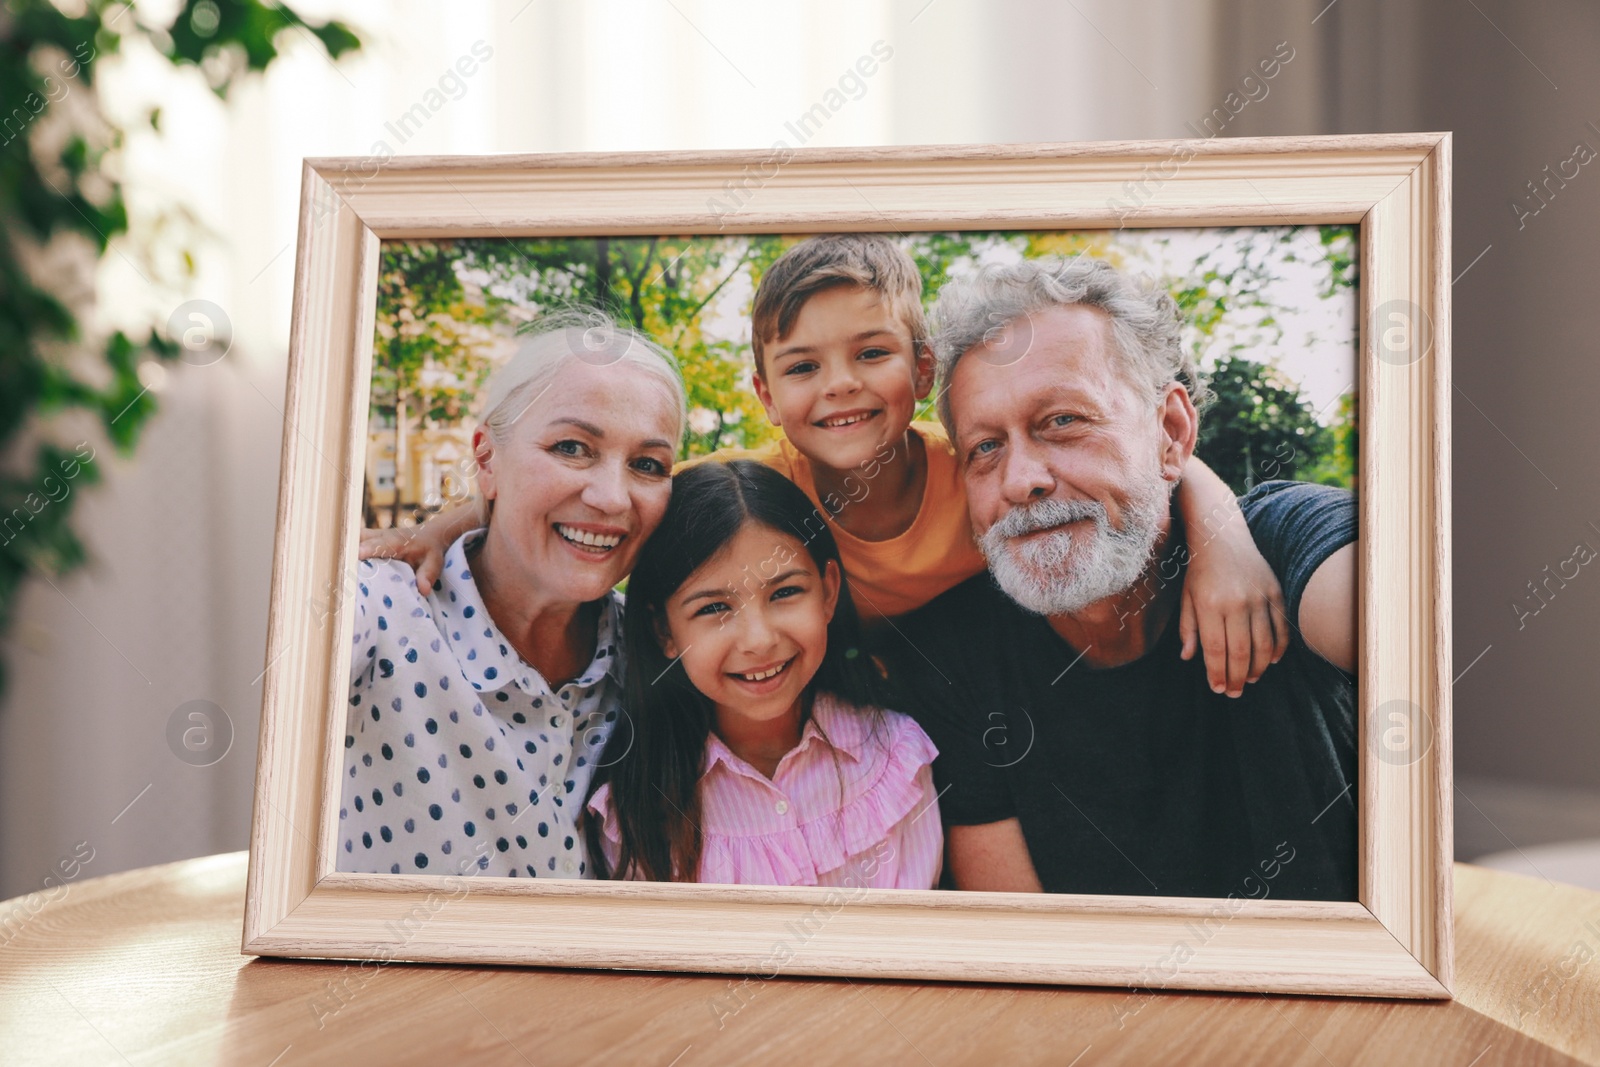 Photo of Framed family photo on wooden table in room